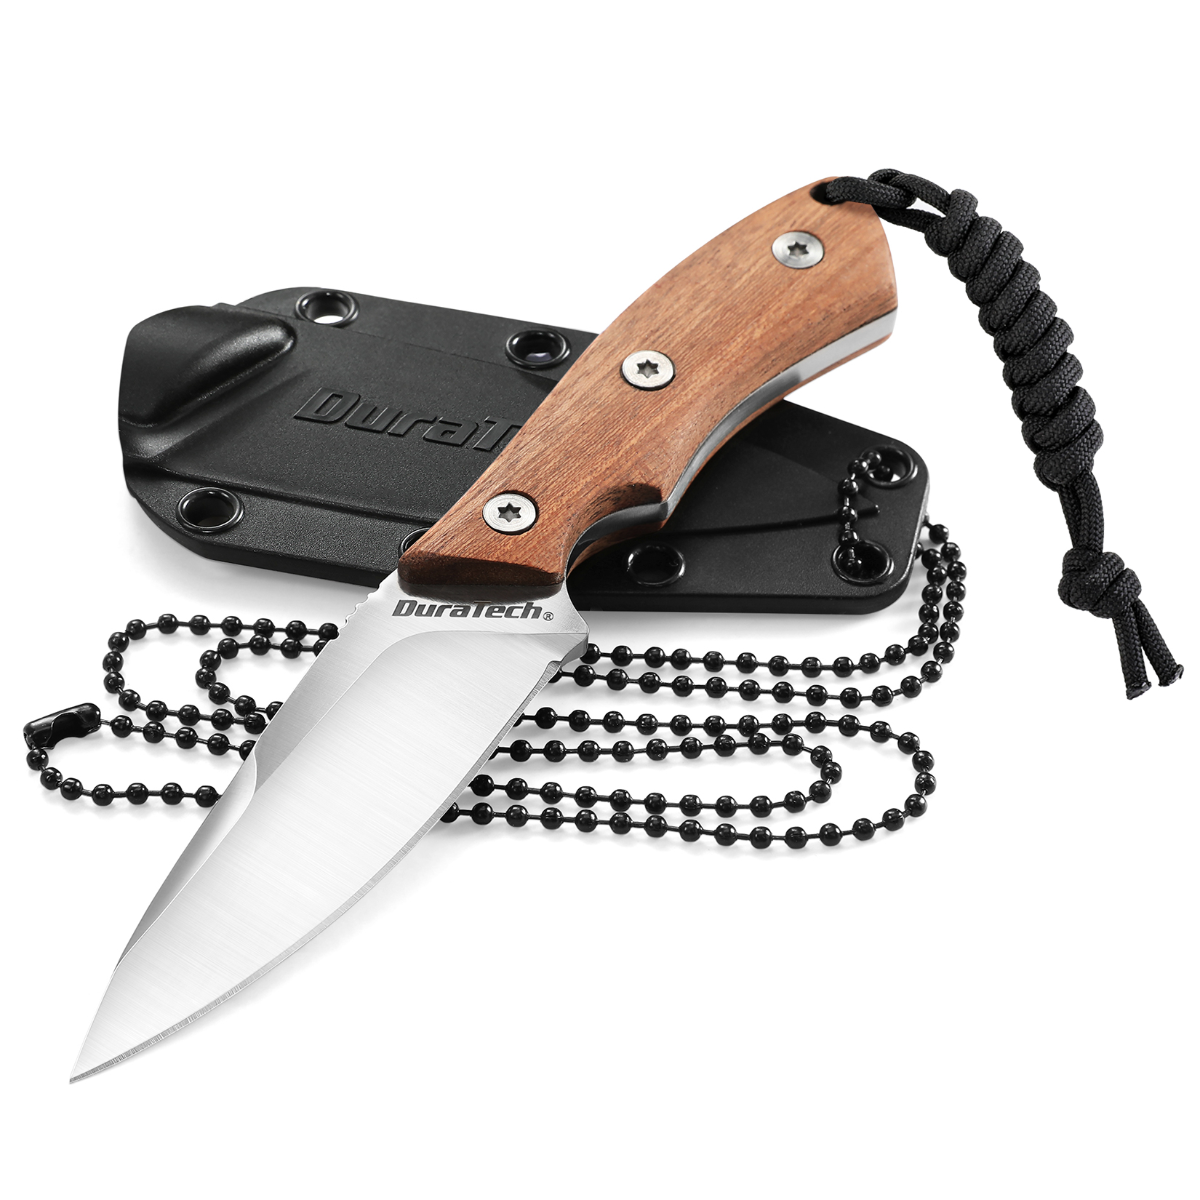 DURATECH Compact Fixed Blade Knife